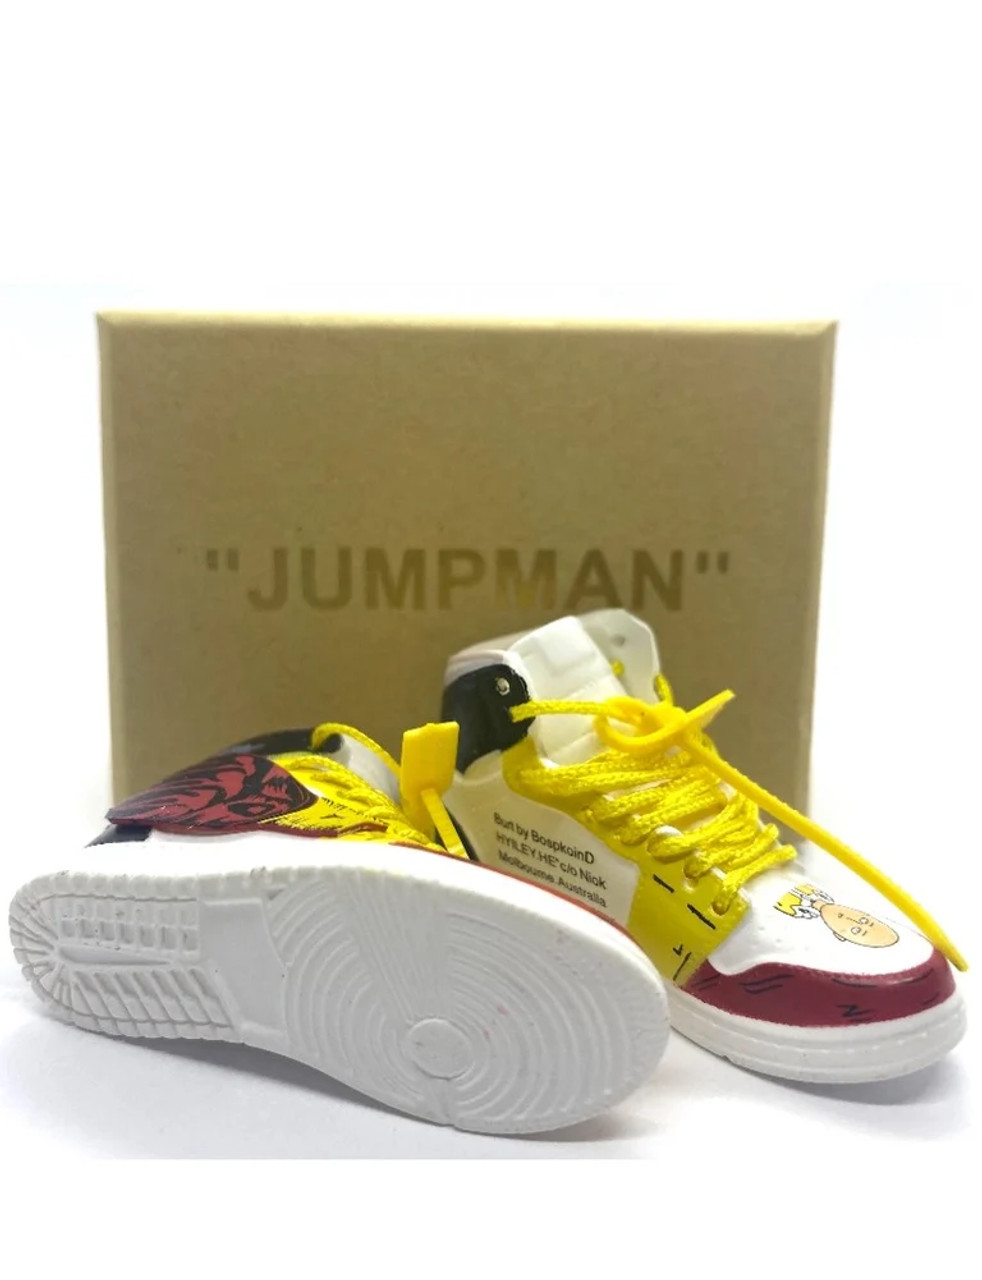 LC BOARDS FINGER SHOES LOUIS VUITTON JUMPMANS - LC Boards Fingerboards